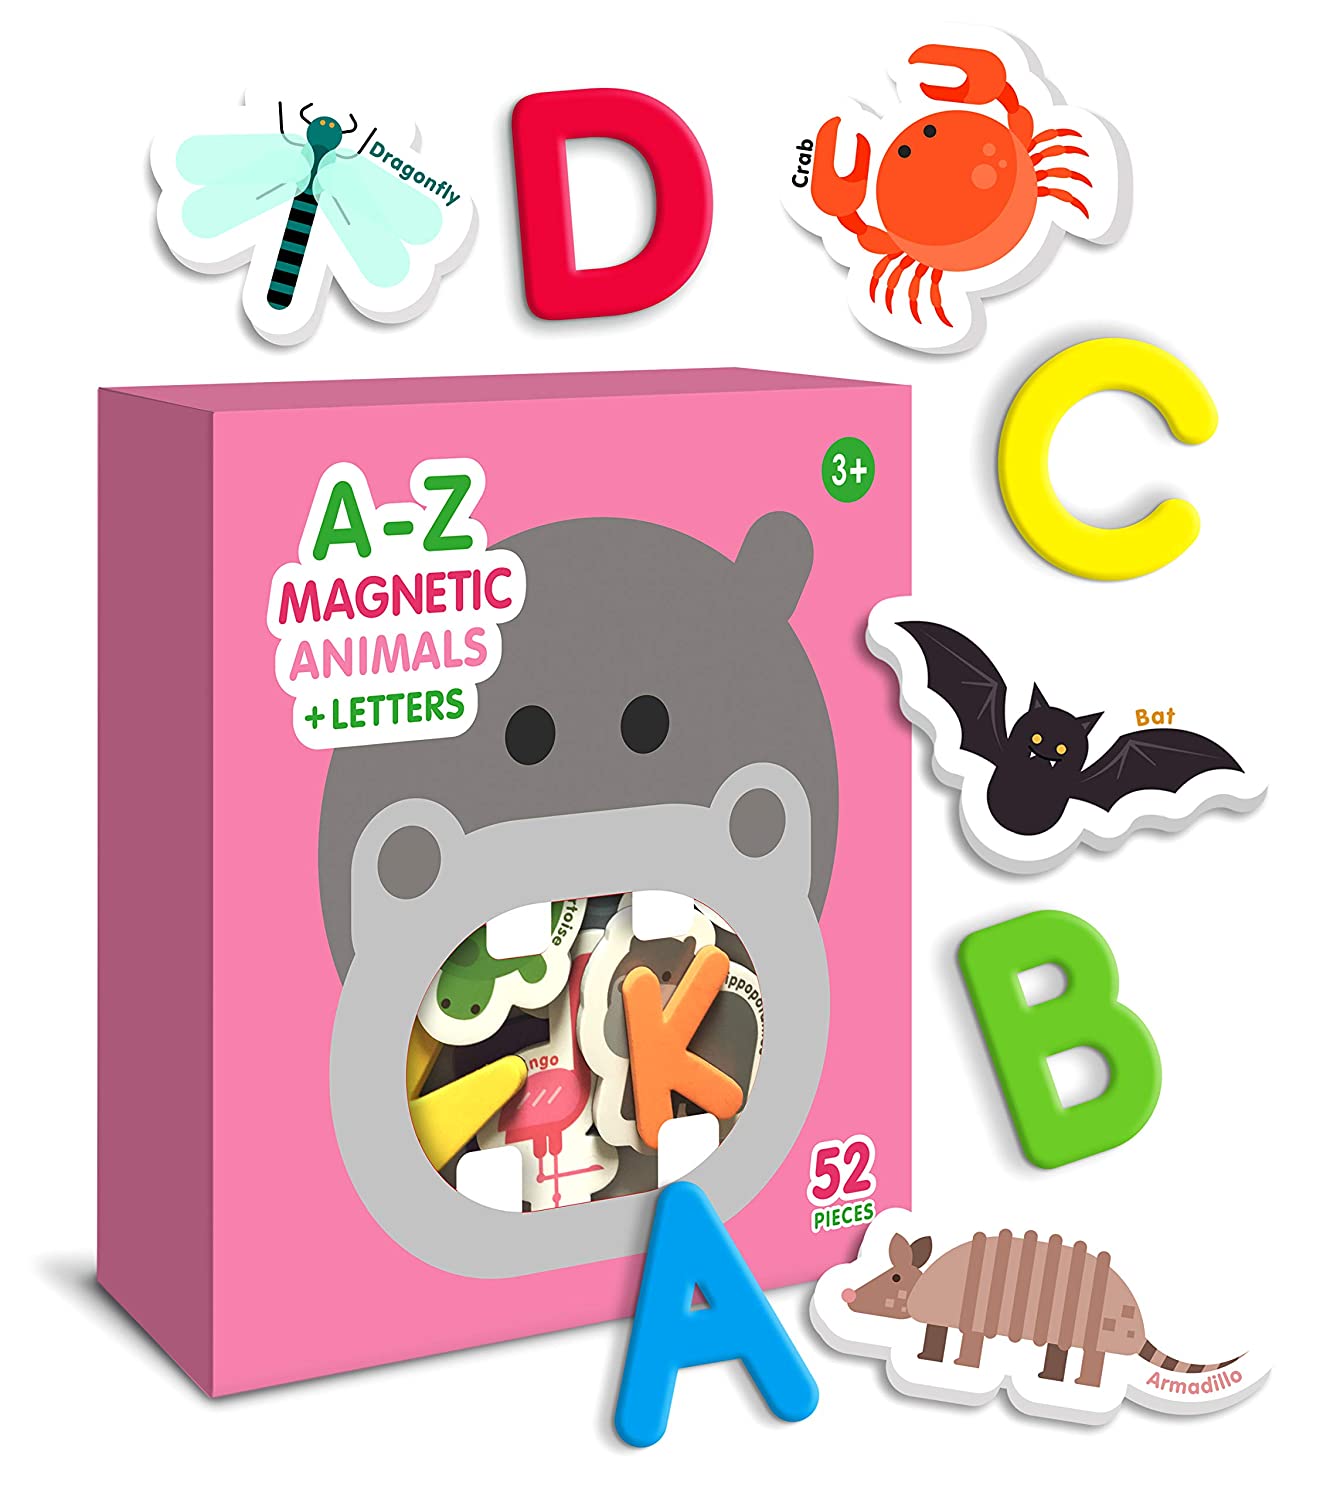 Curious Columbus Animal Magnets For Kids. Includes Alphabet Letters. Set of 52 Pieces